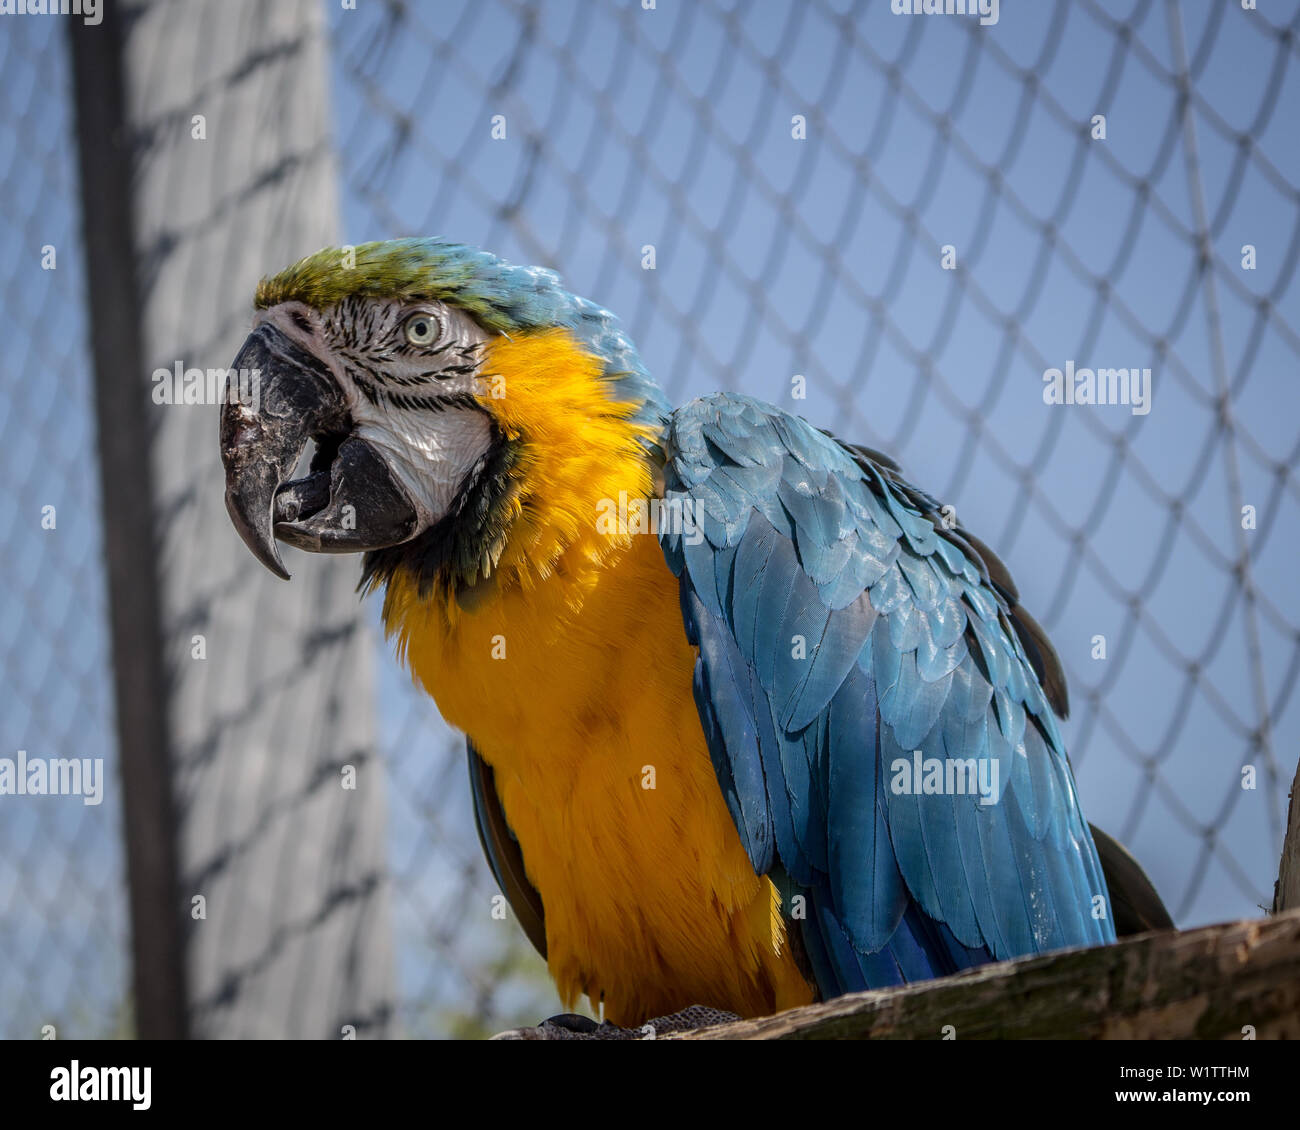 Macaw Parrot at a zoo Stock Photo